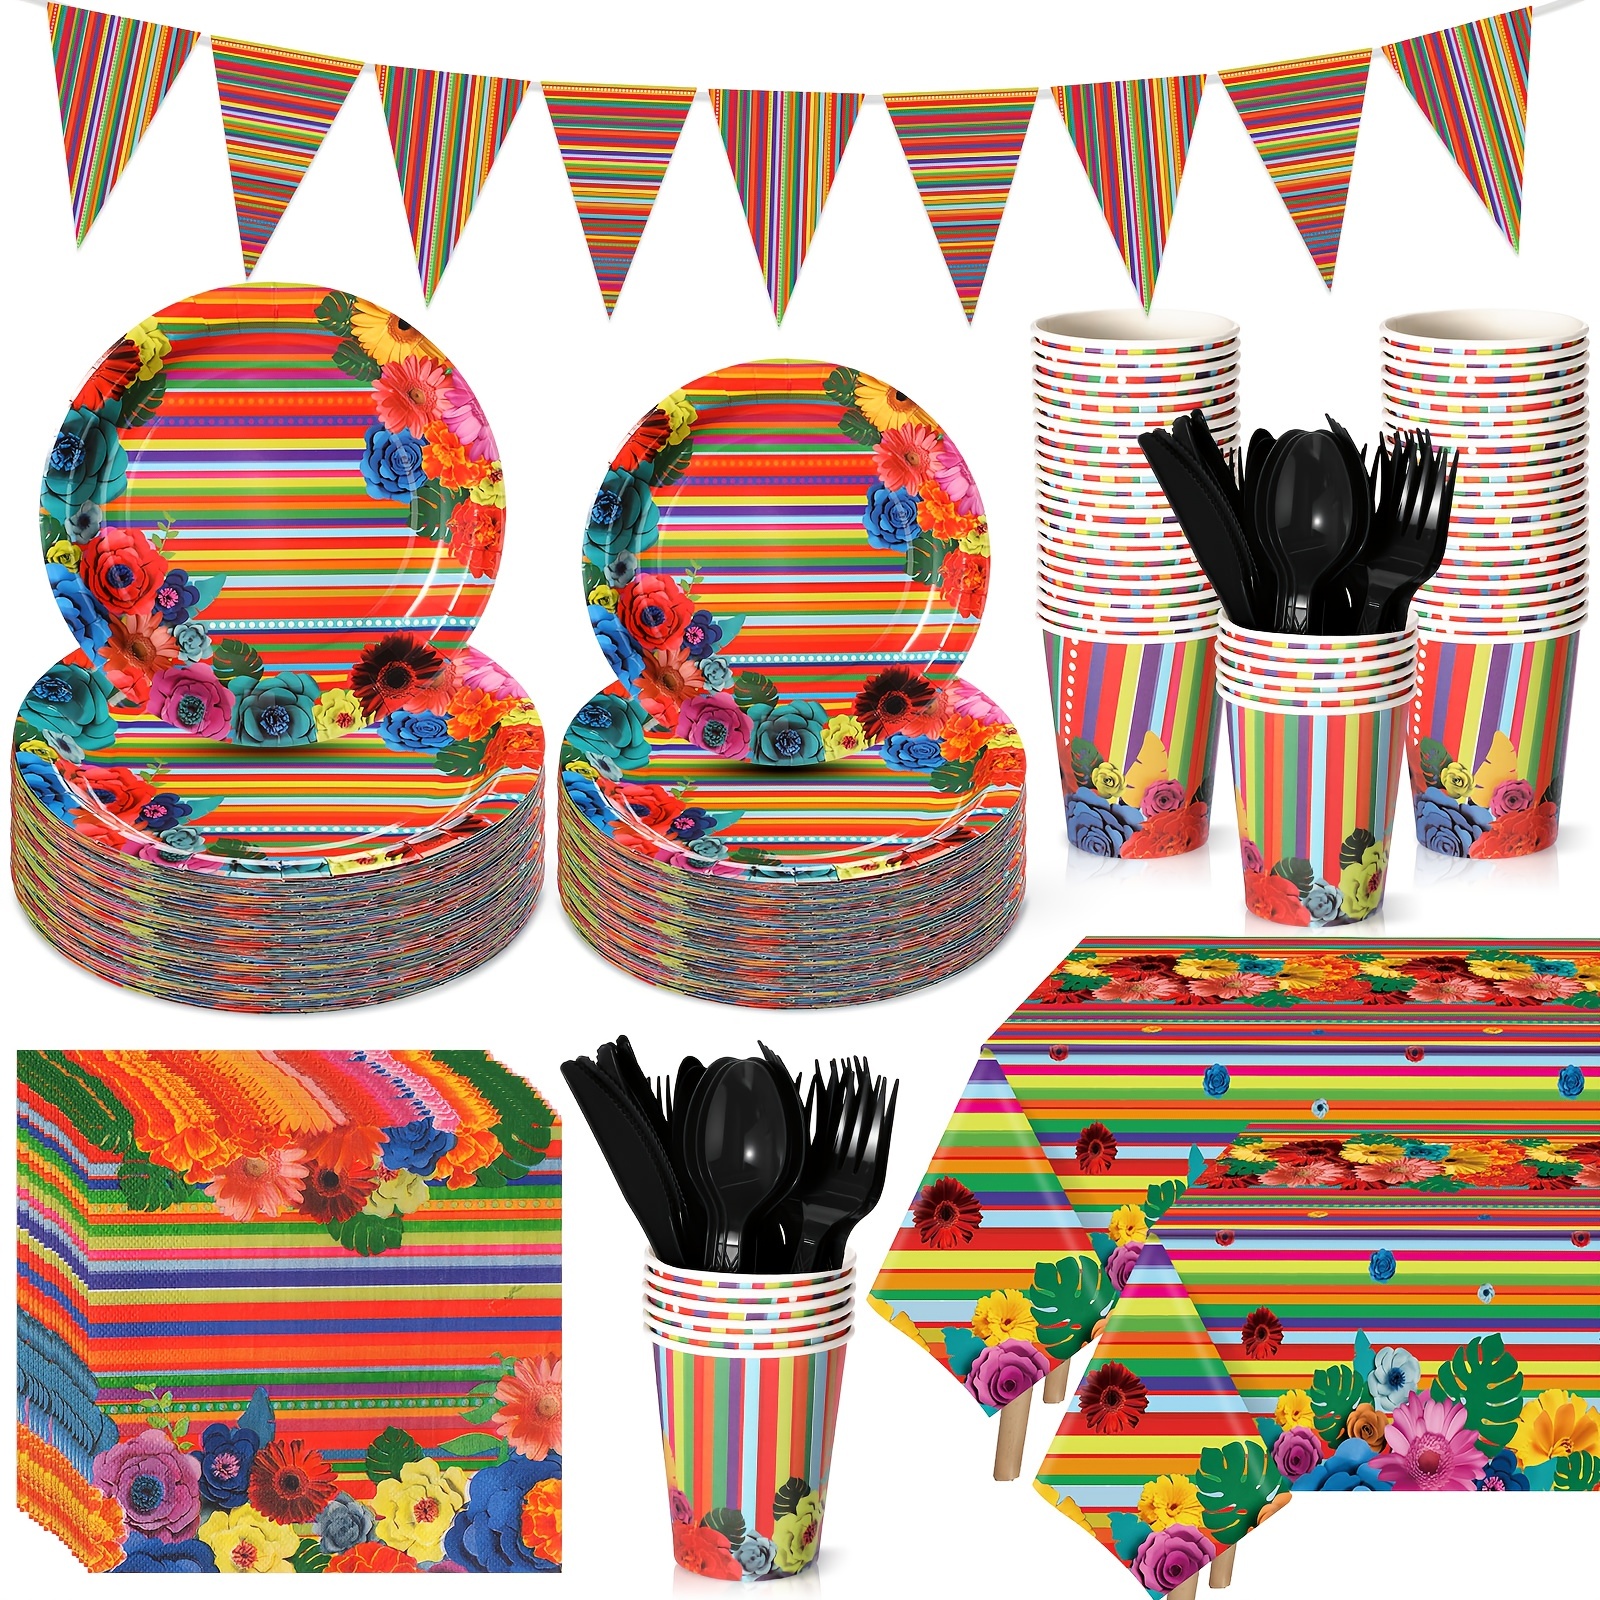 

171 Pcs Mexican Party Supplies Mexican Tableware Set Cinco De Mayo Paper Plate Cup Napkin Fork Knives Spoon Tablecloths Banner For Fiesta Birthdays Weddings Party Favors Decorations